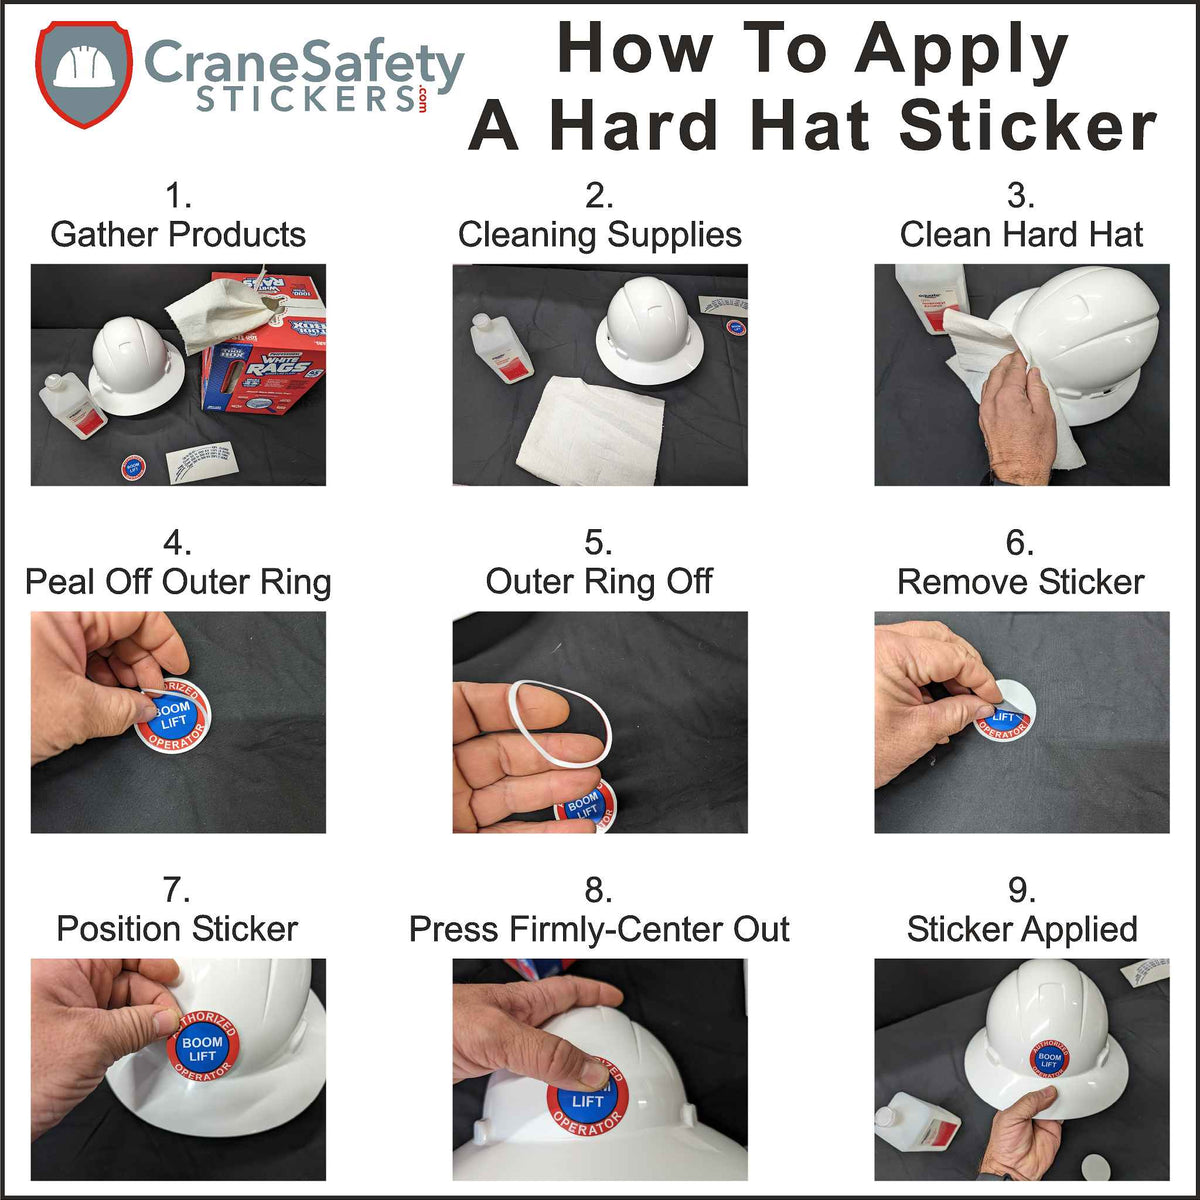 How To Apply Our Certified Crane Signal Person Sticker To A Hard Hat.